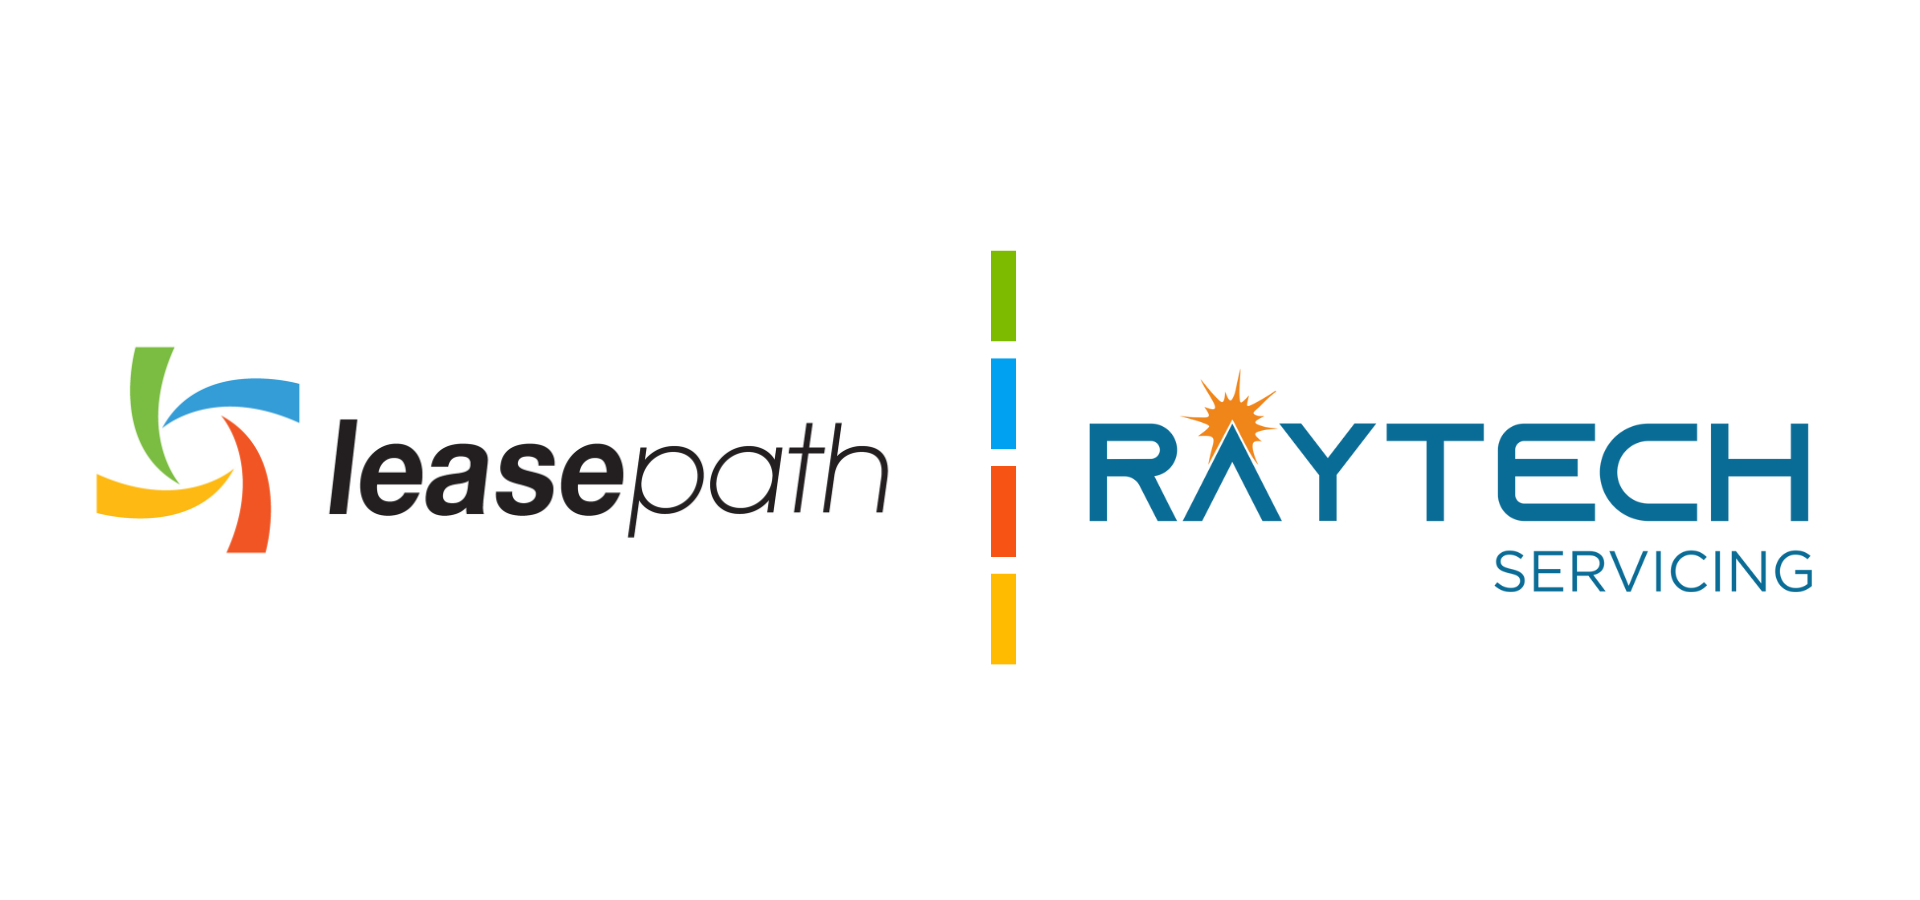 RayTech Goes Live with Leasepath Enterprise